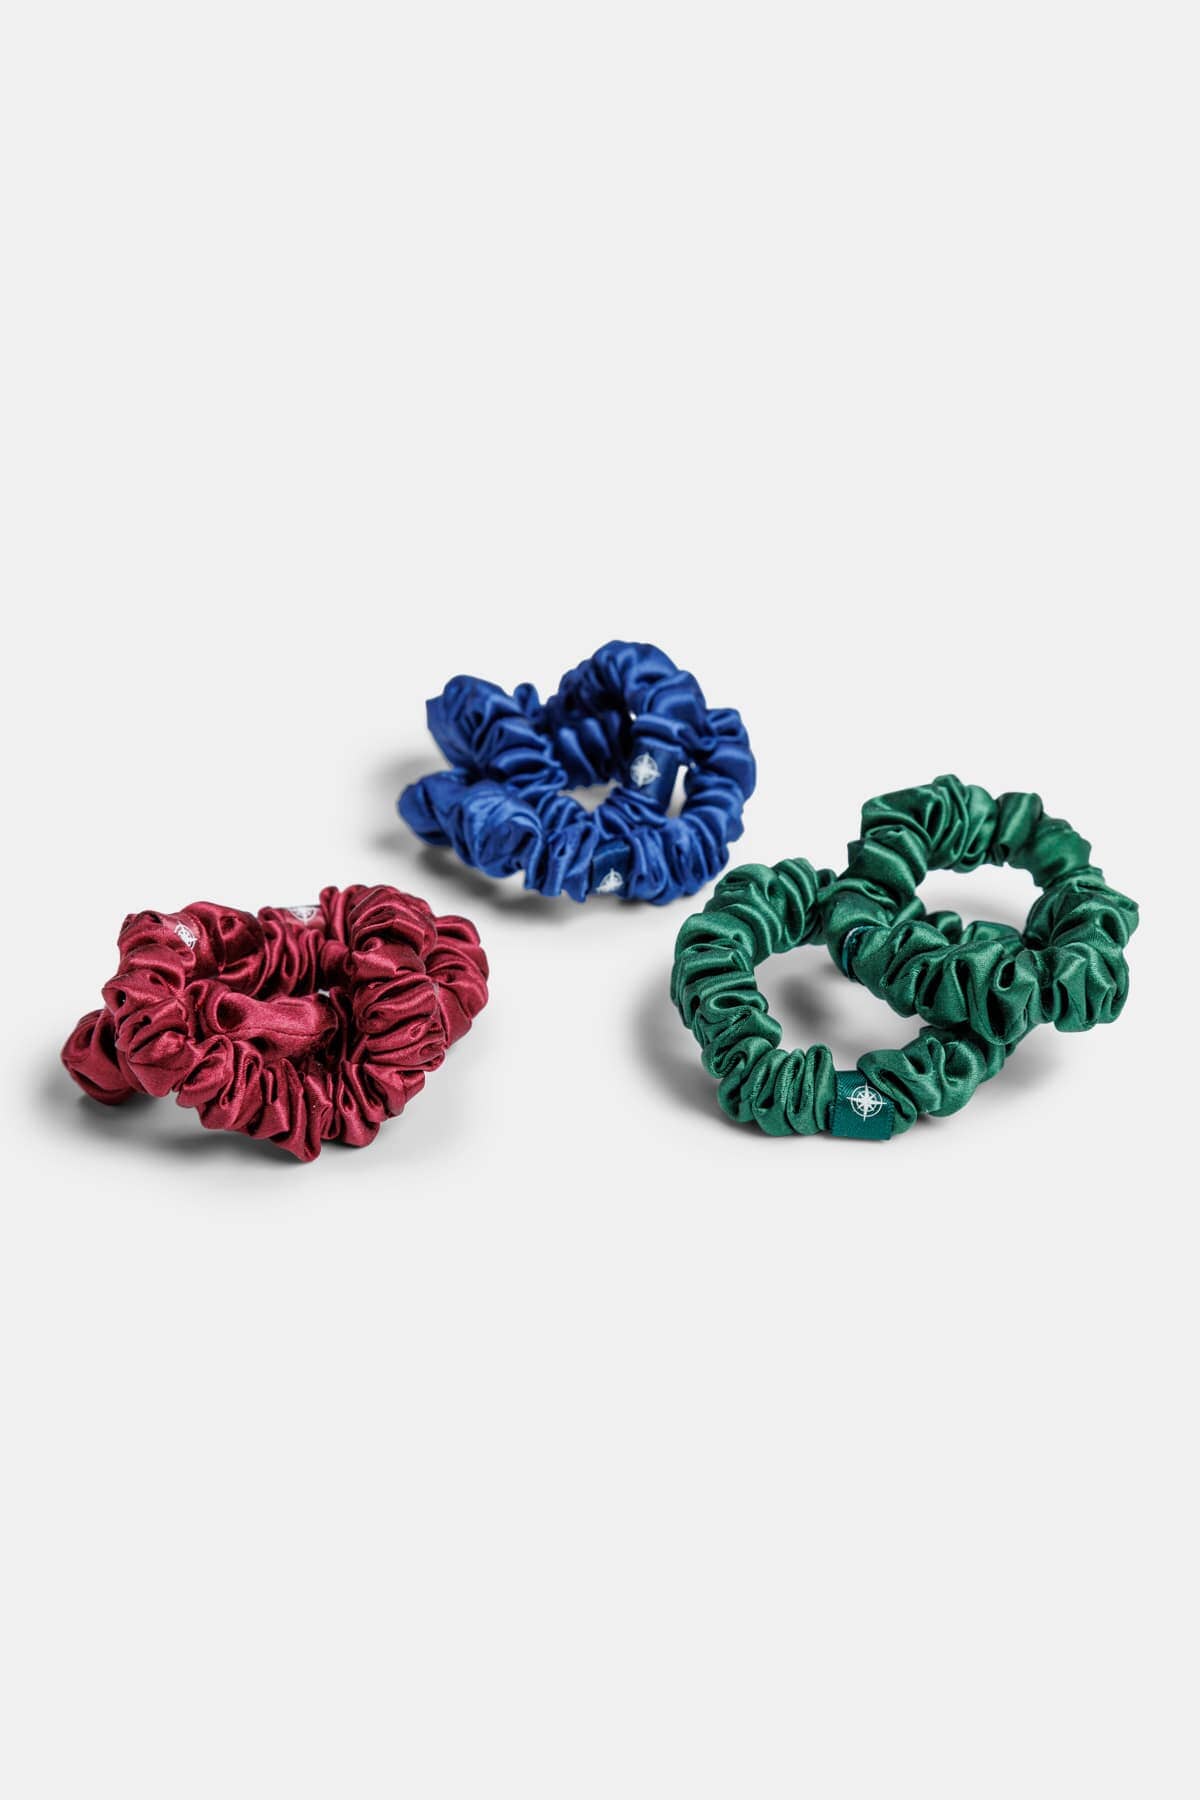 100% Pure Mulberry Silk Hair Scrunchies with Gift Box - Set of 6 Skinny Hair Ties Womens>Beauty>Hair Care Fishers Finery Navy-Hunter Green-Burgundy 